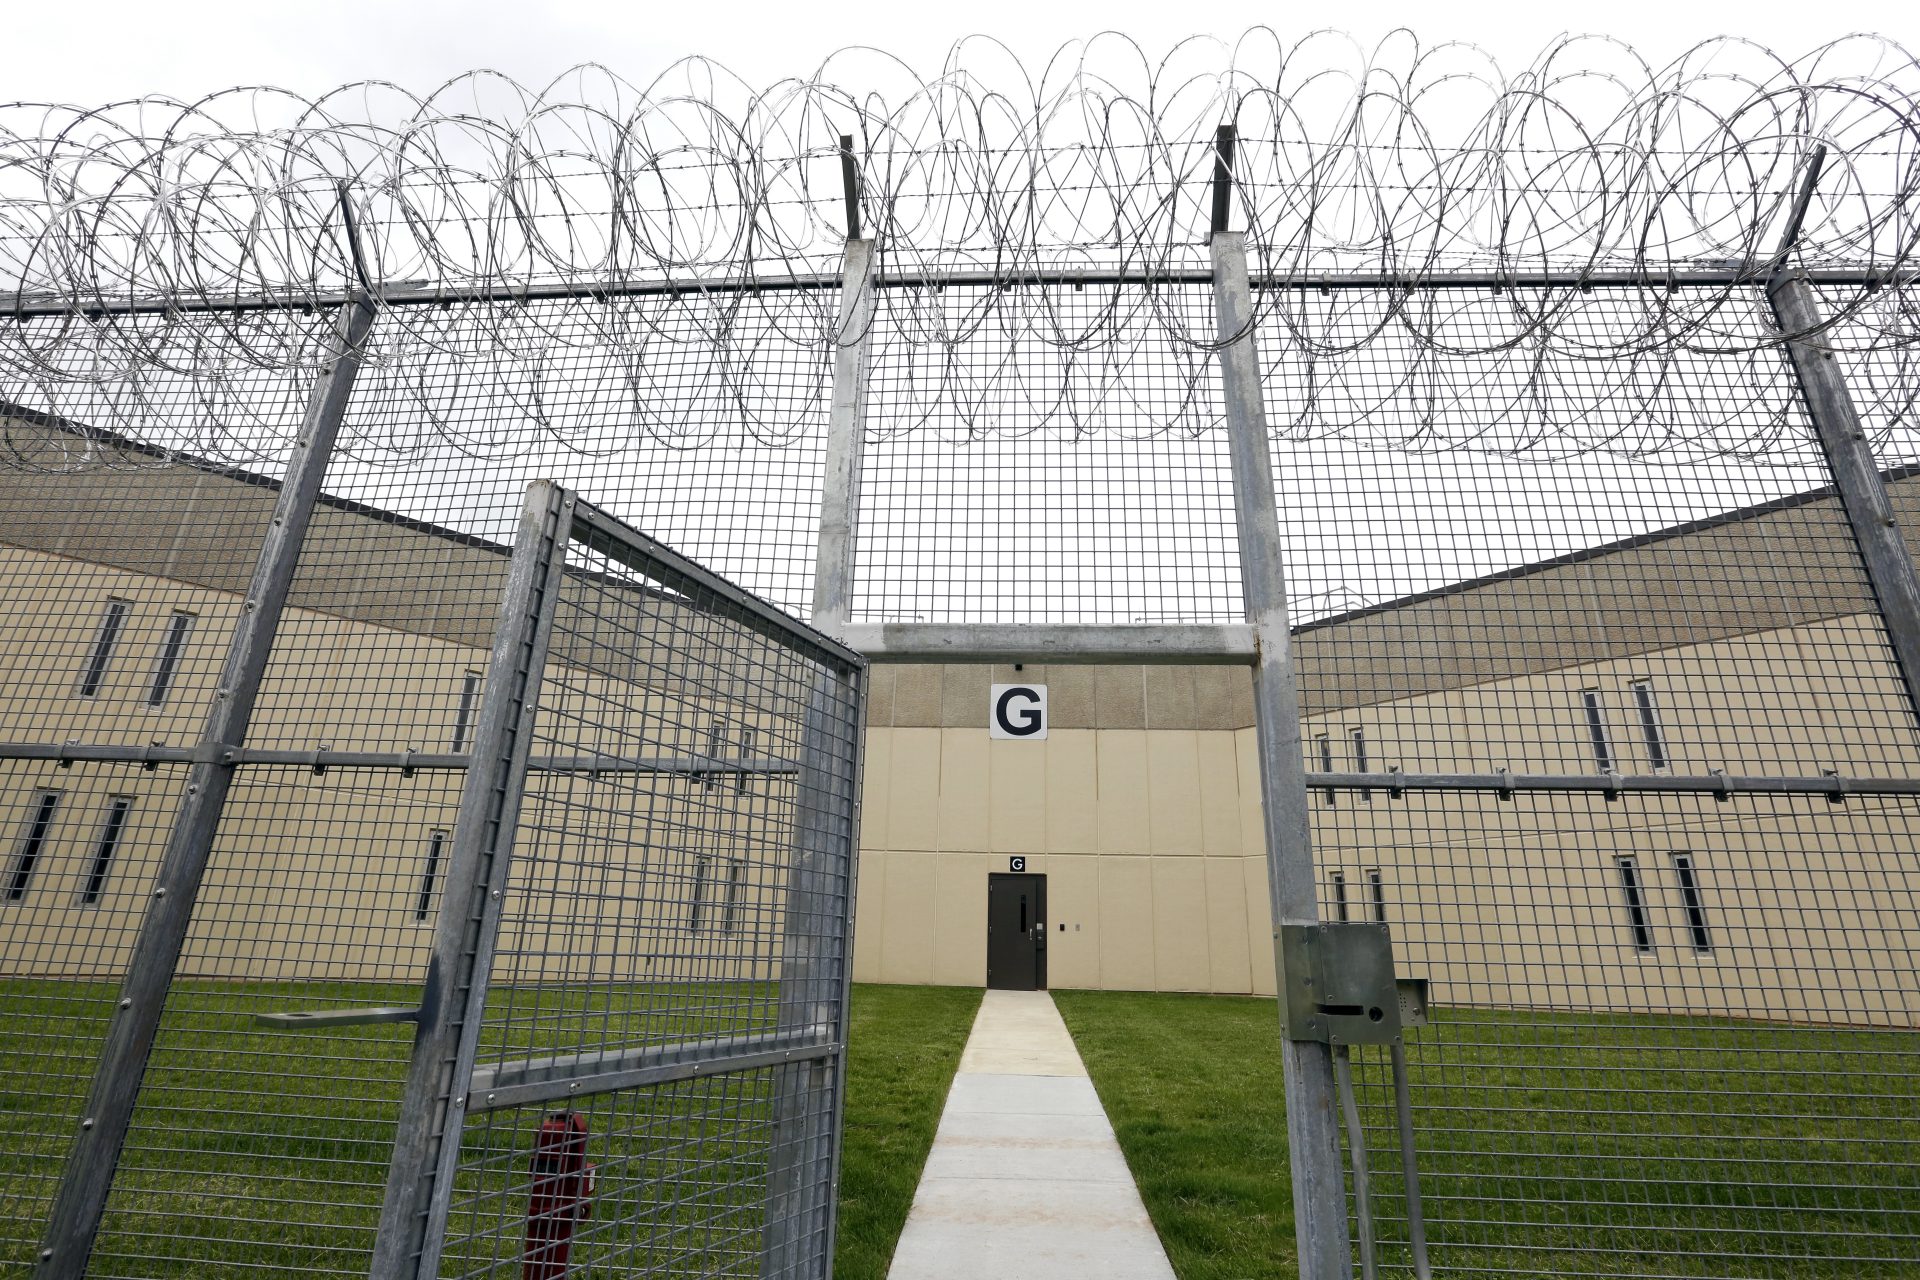 Block G is toured in the West section of the State Correctional Institution at Phoenix Friday June 1, 2018 in Collegeville, Pa.